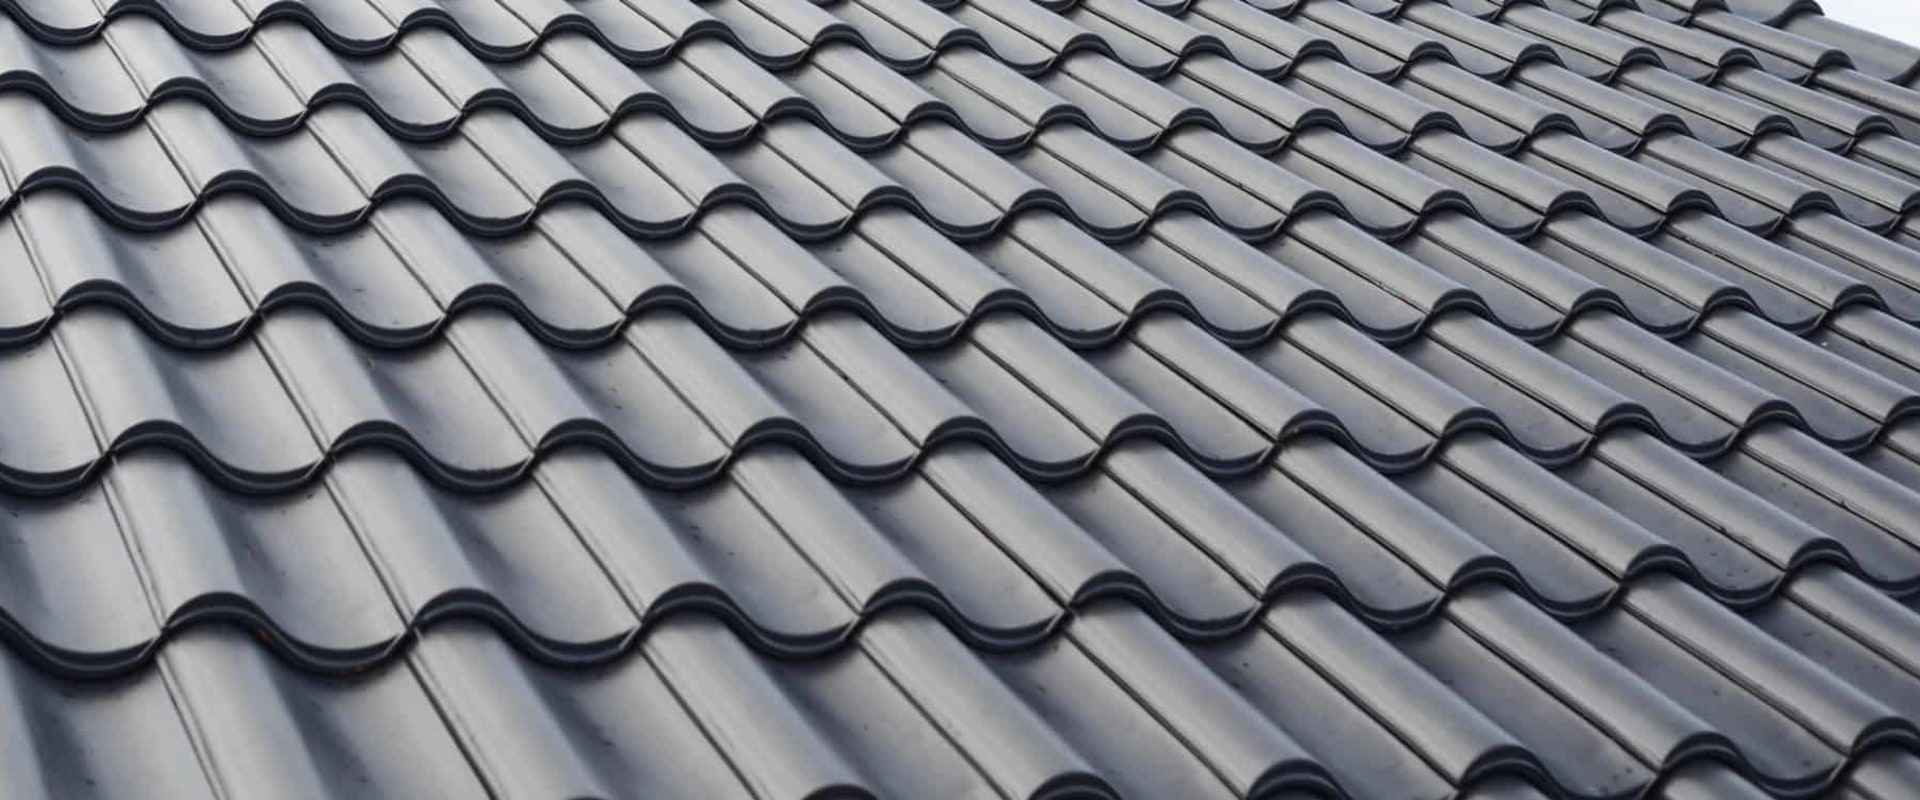 A Comprehensive Guide to Tile Roofing for Your Home or Business